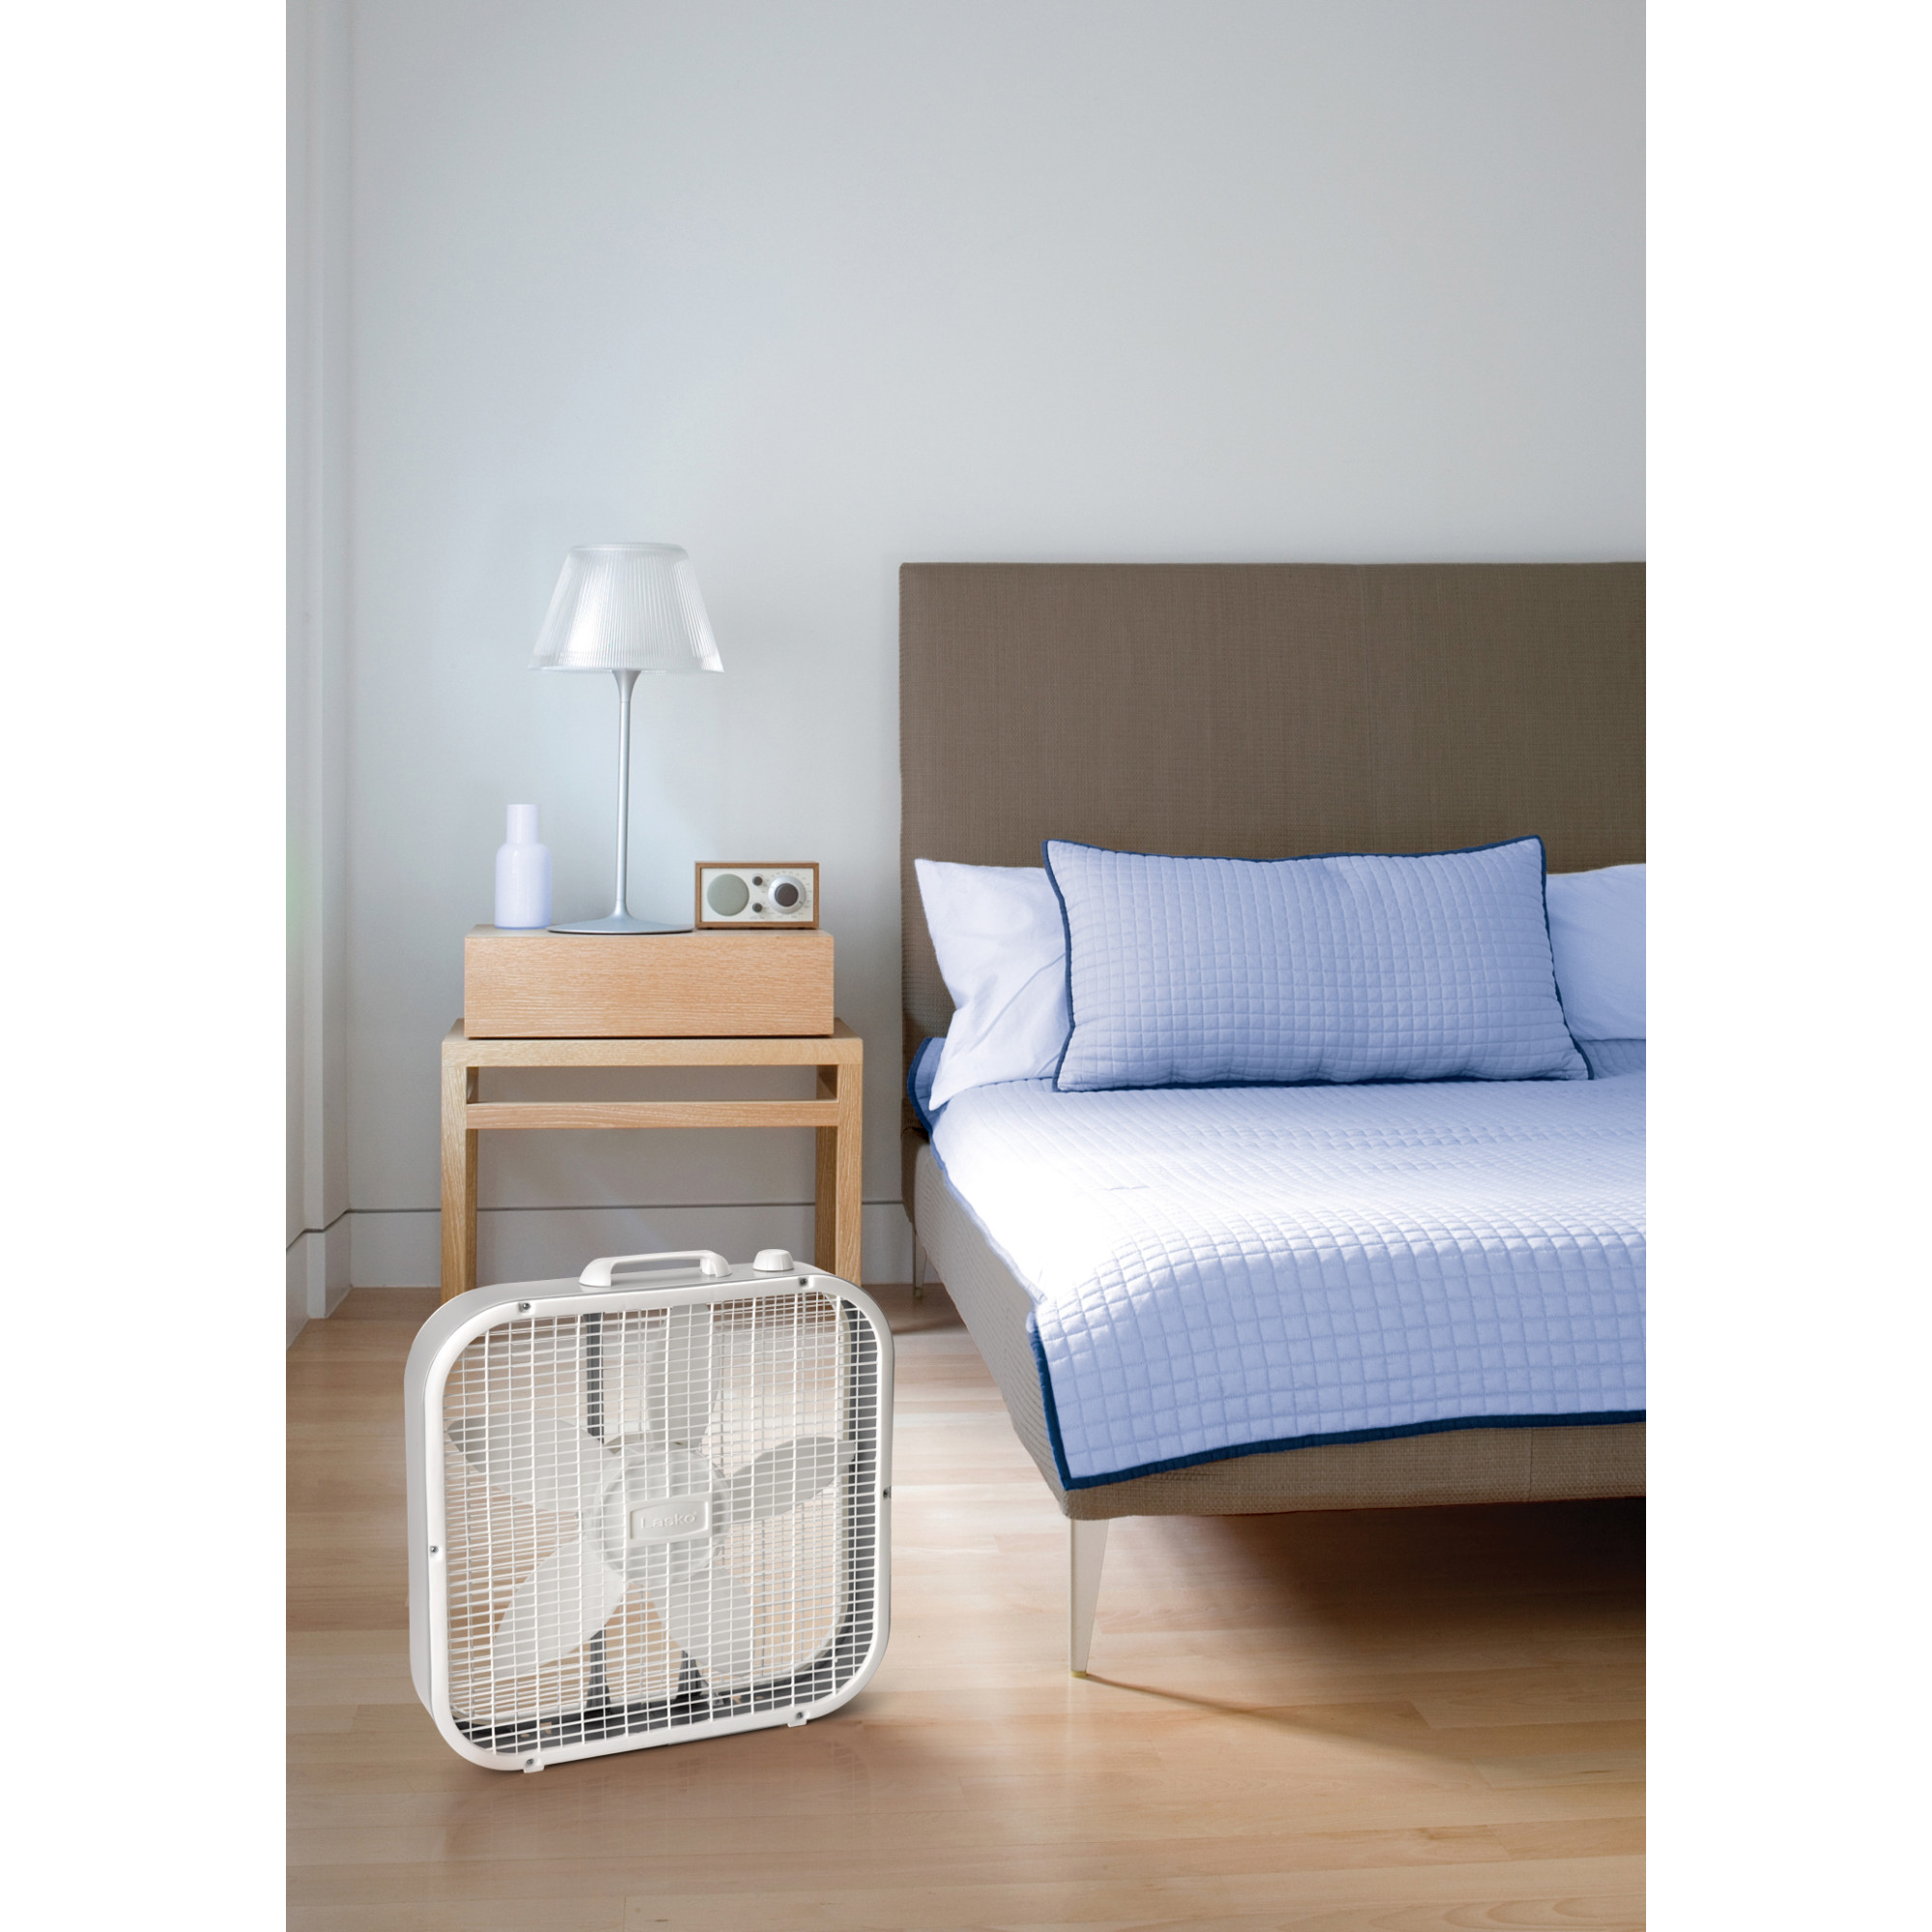 Lasko 20" Classic Box Fan with Weather-Resistant Motor, 3 Speeds, 22.5" H, White, B20200, New - image 6 of 6